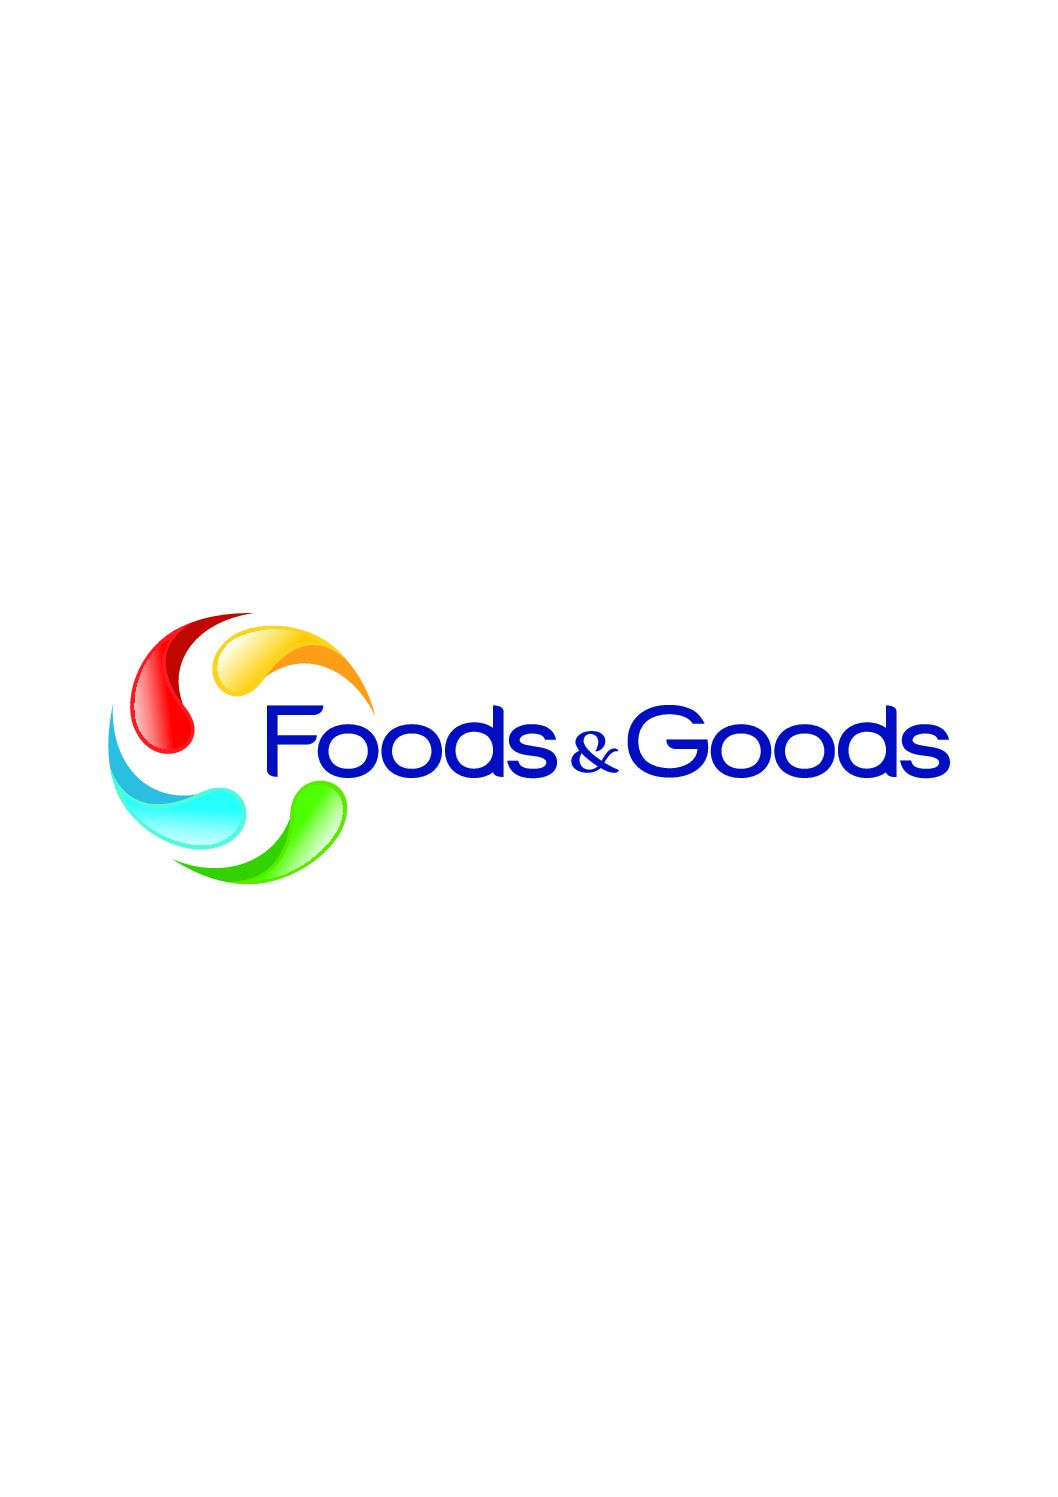 Foods and Goods